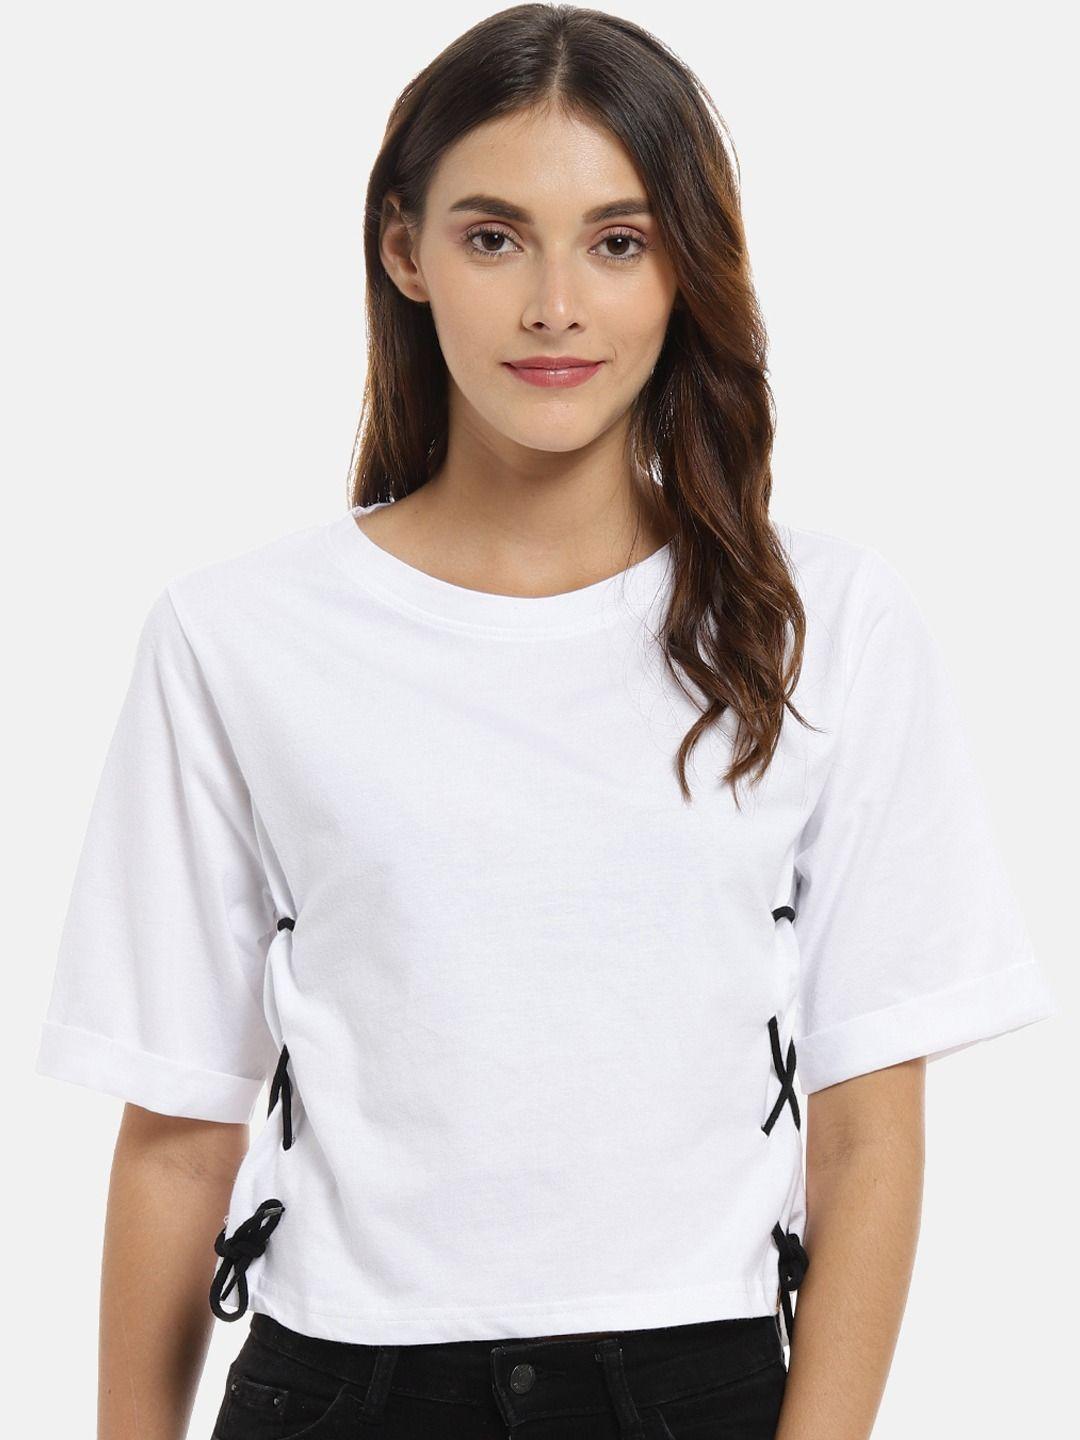 campus-sutra-white-solid-crop-top